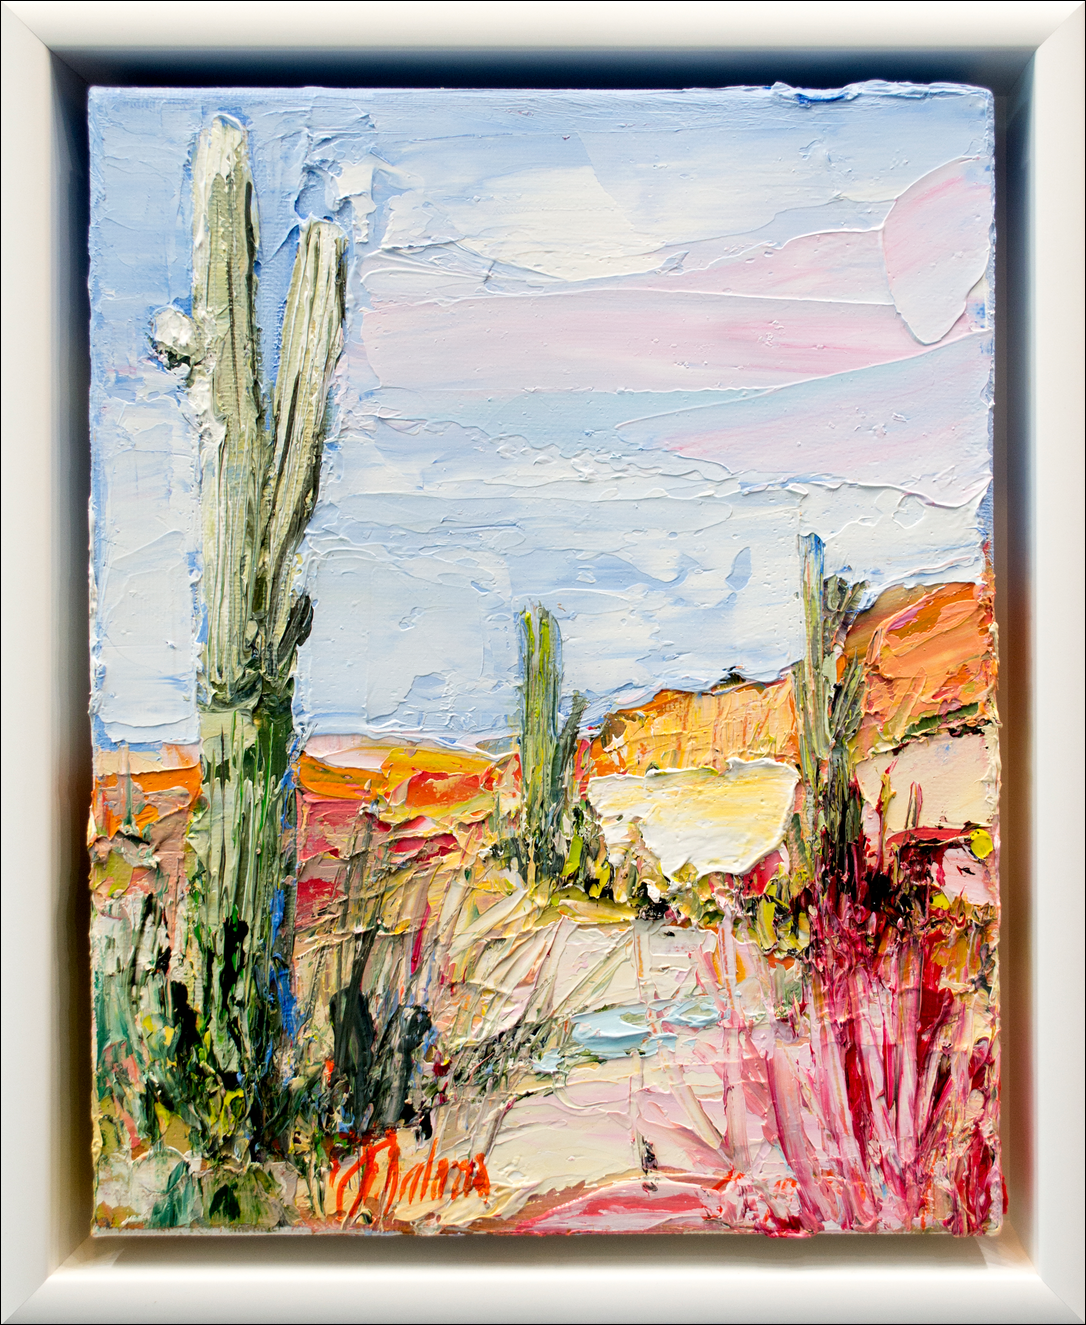 Framed Front View Of Landscape Painting "Desert Off Track Scottsdale Arizona 2" By Judith Dalozzo